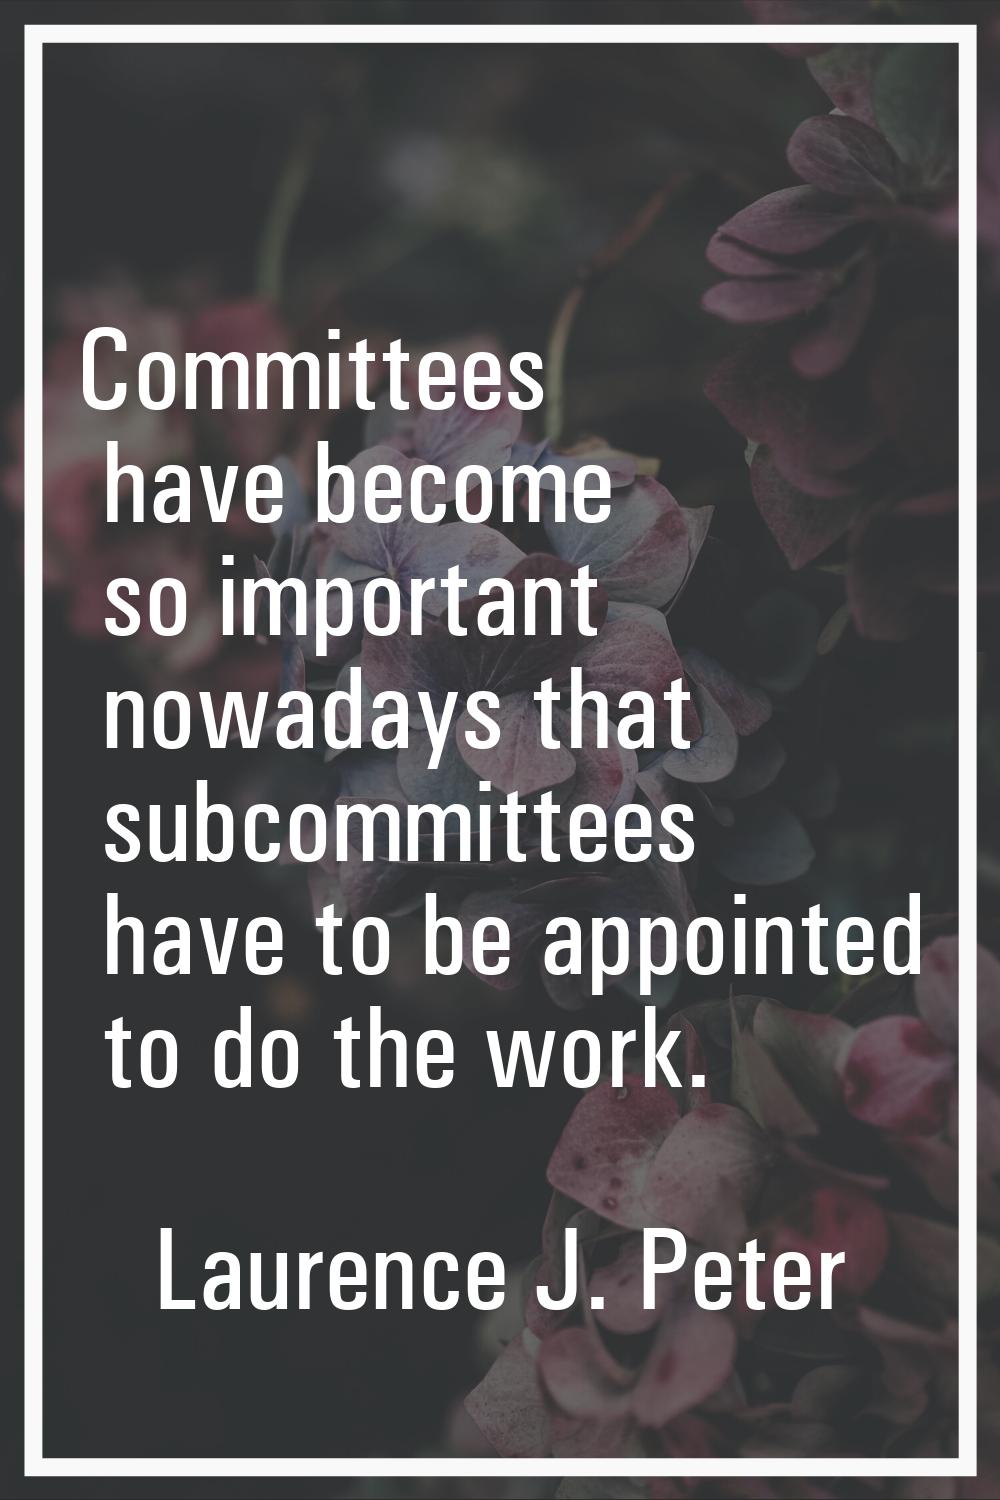 Committees have become so important nowadays that subcommittees have to be appointed to do the work